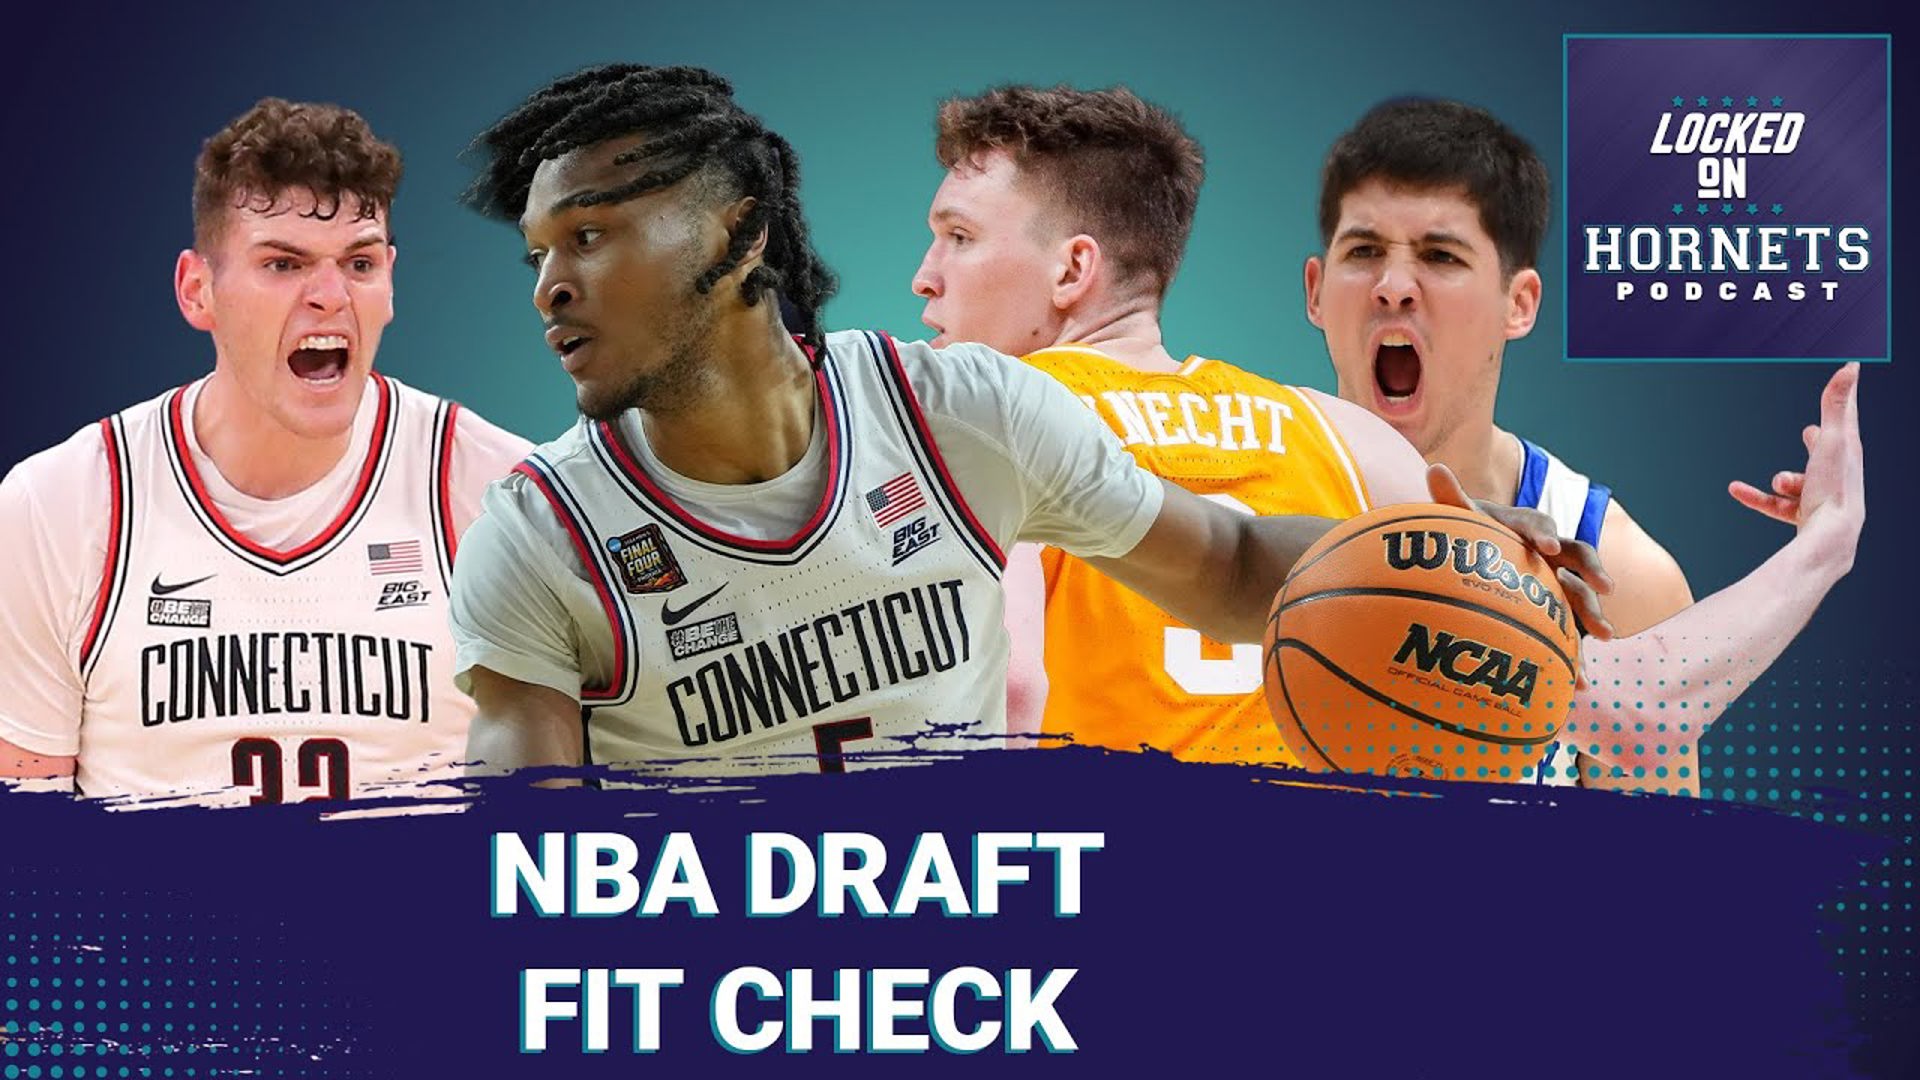 Fit or Misfit: Who are the NBA Draft prospects that make sense for the Charlotte Hornets?